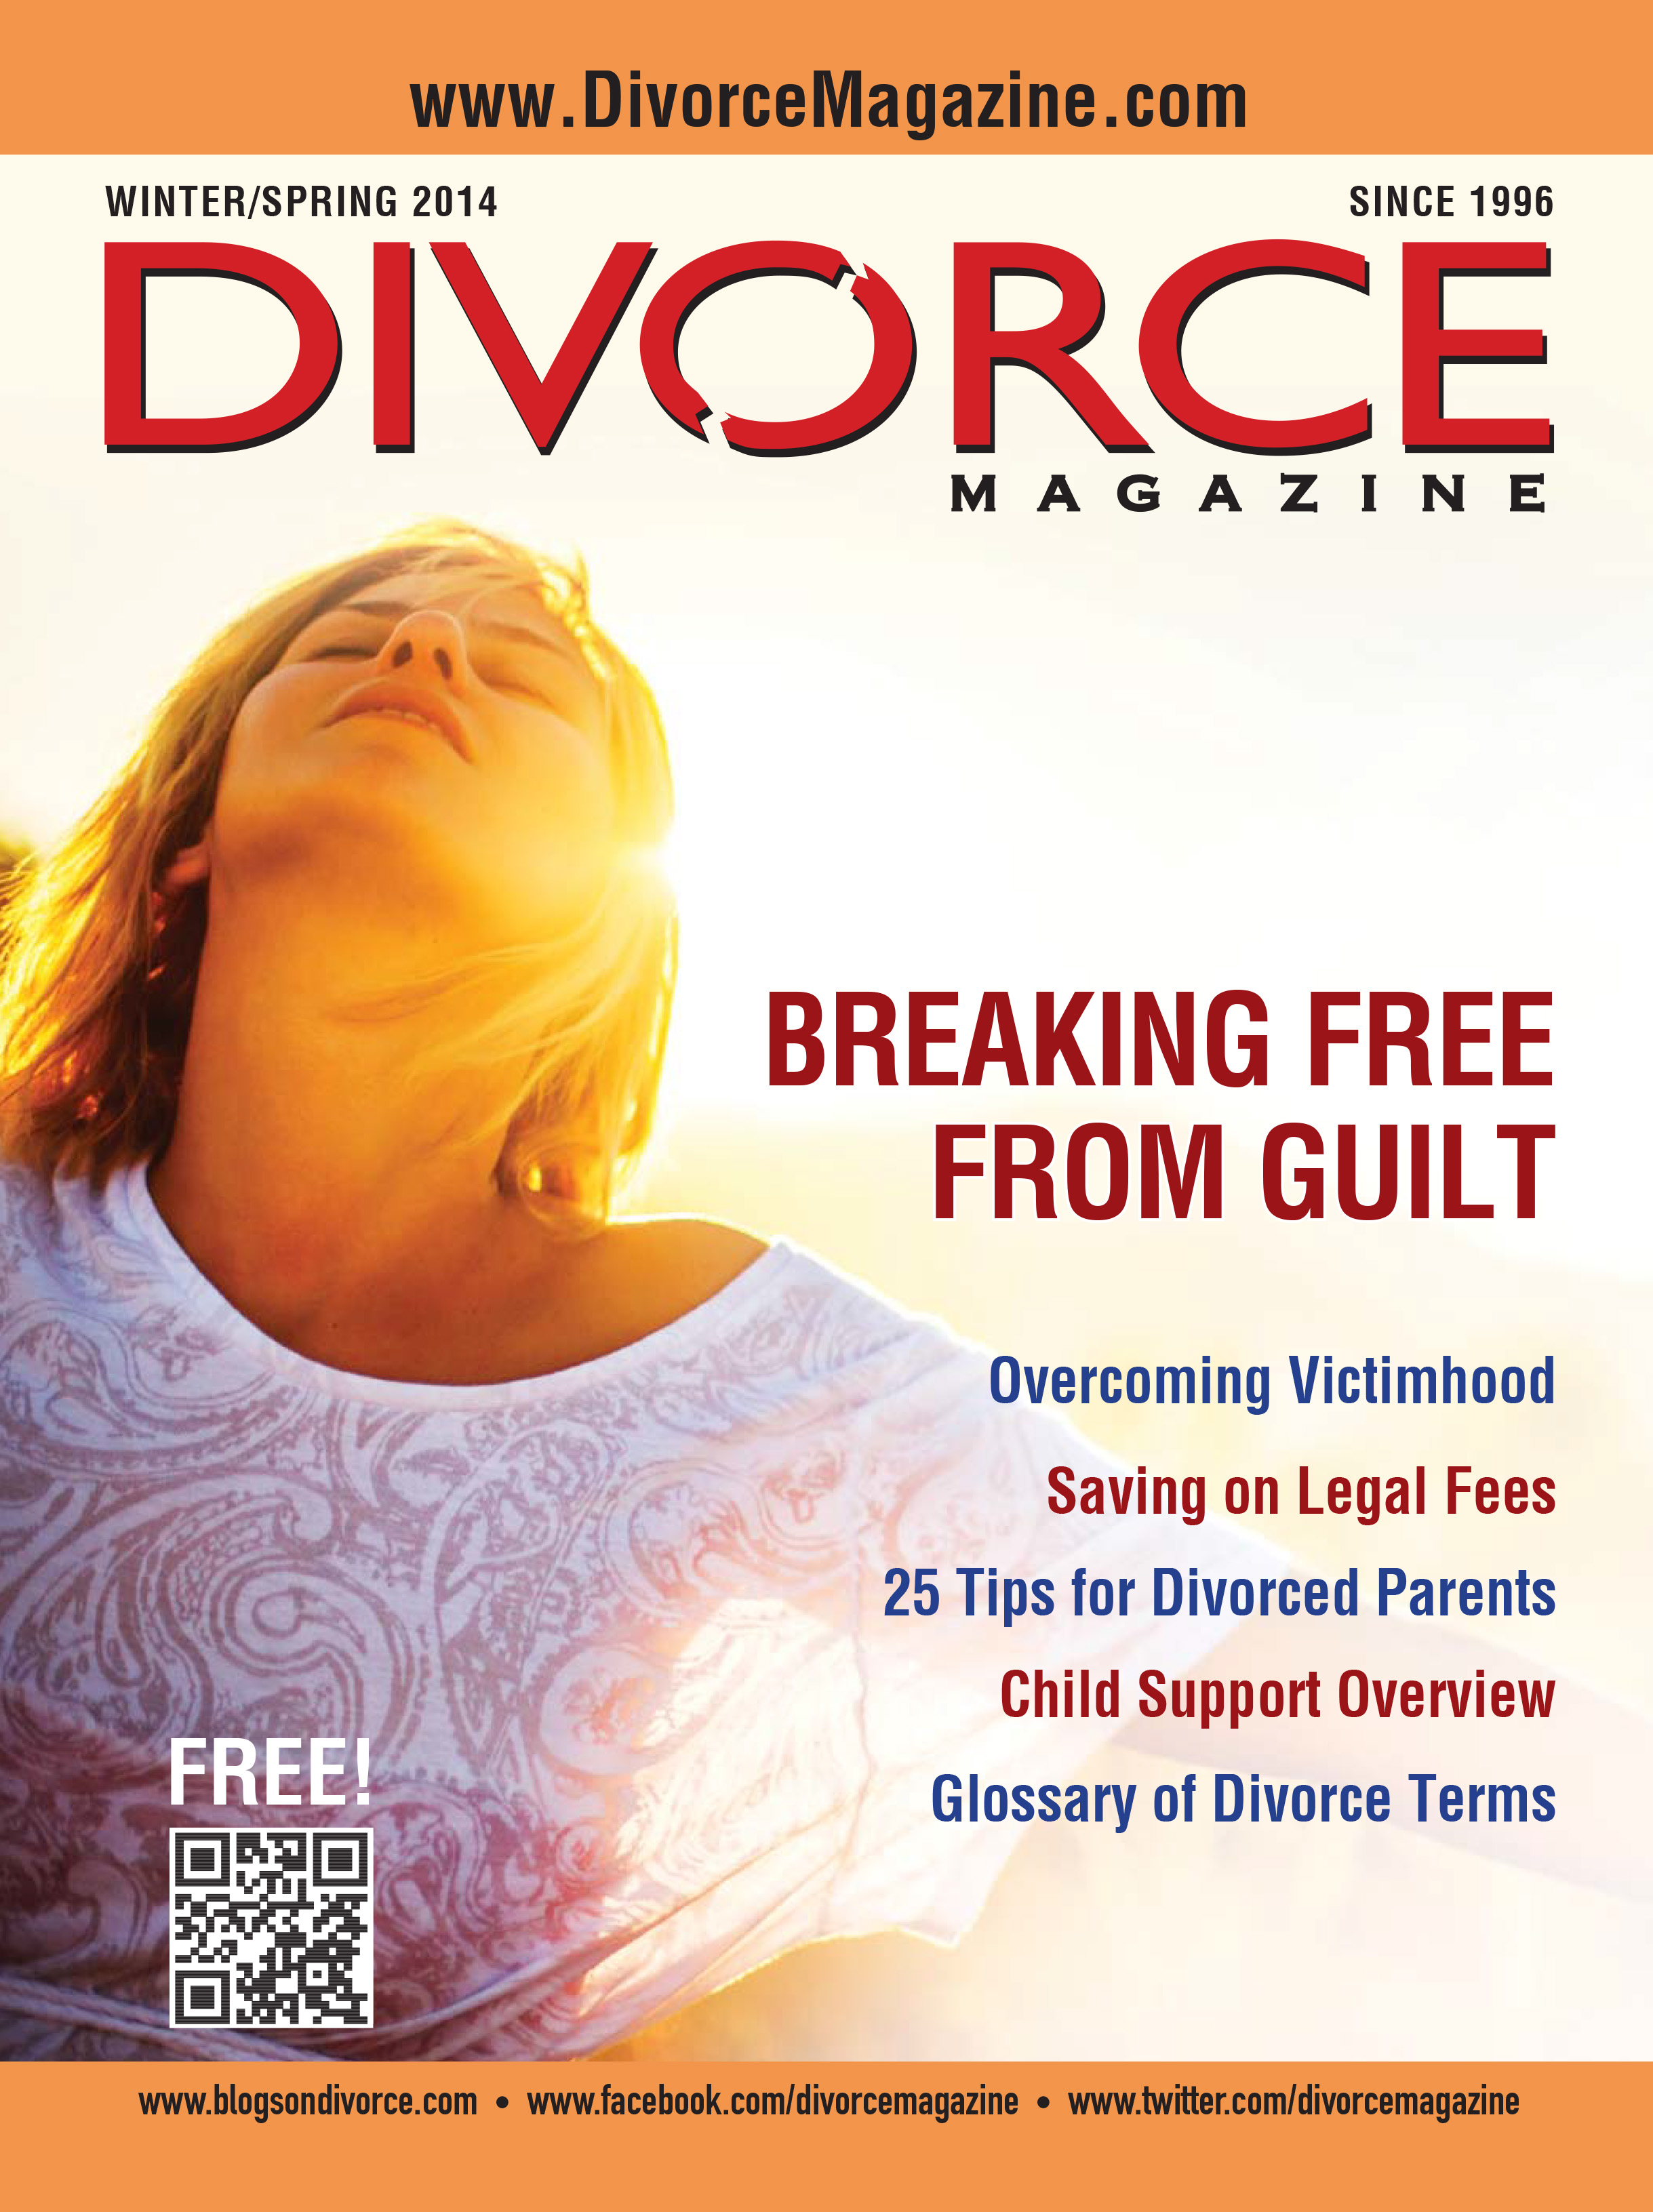 Divorce Magazine Spring 2014 issue is now available for FREE download